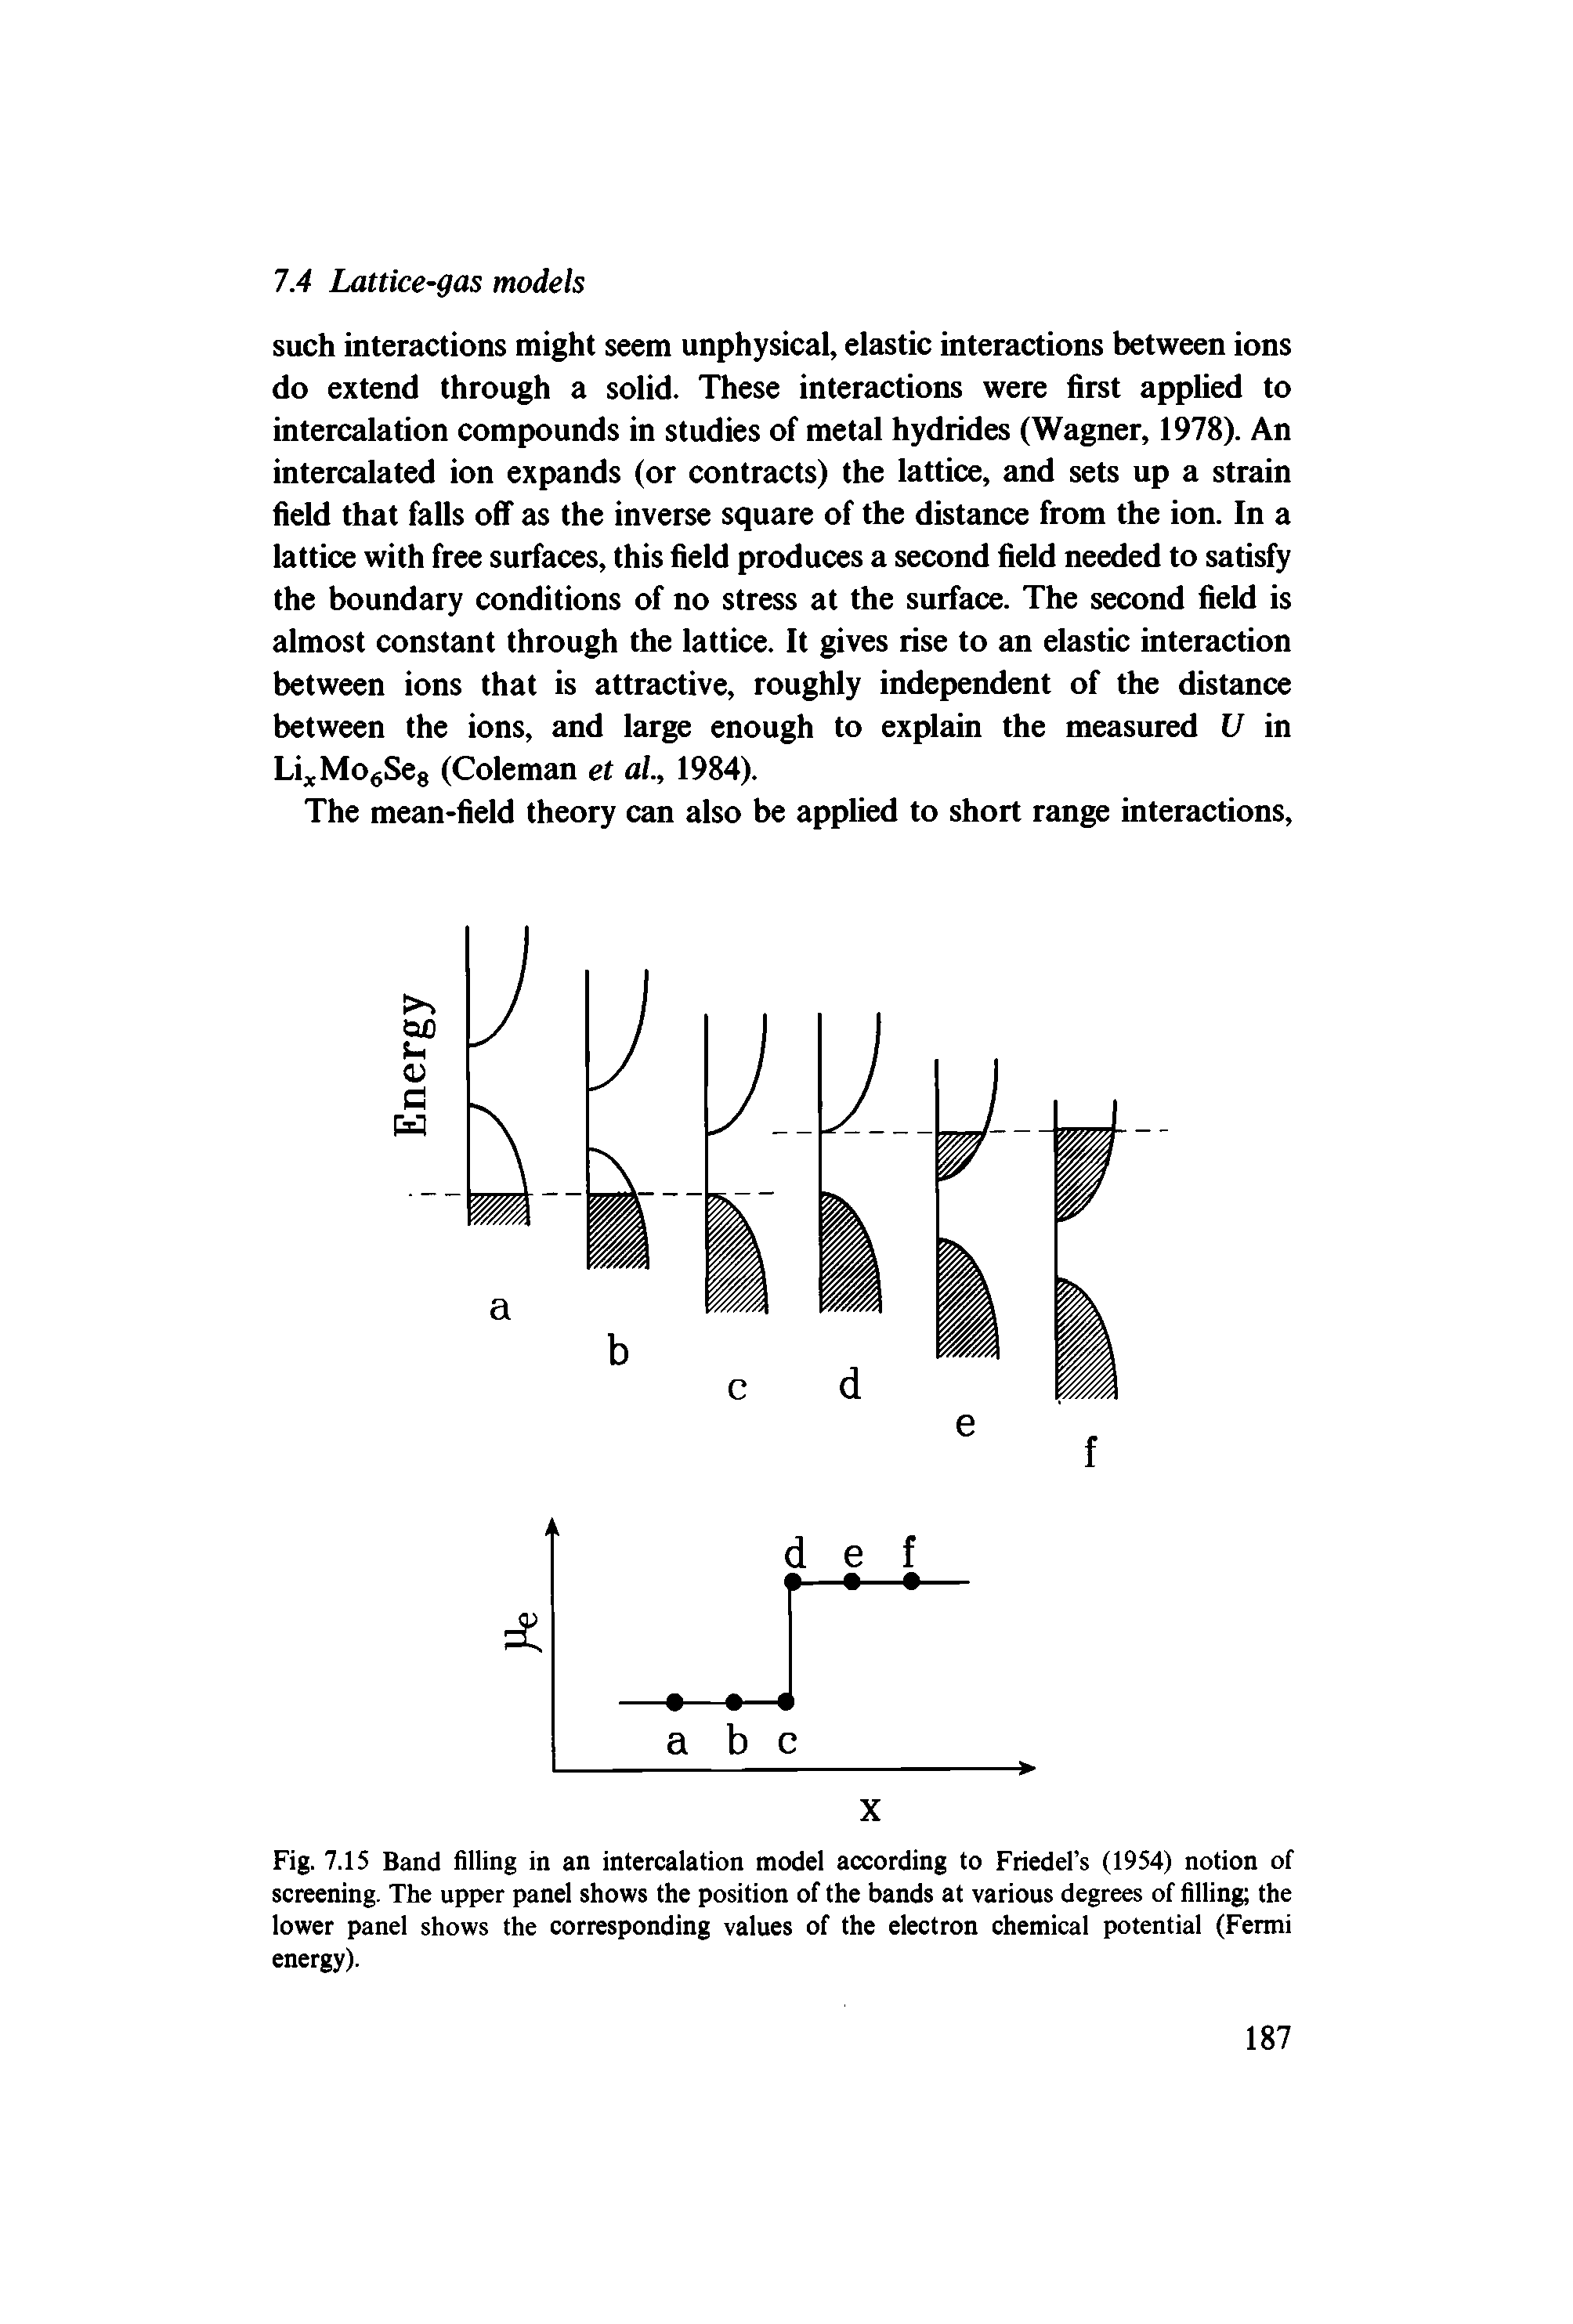 Fig. 7.15 Band filling in an intercalation model according to Friedel s (1954) notion of screening. The upper panel shows the position of the bands at various degrees of filling the lower panel shows the corresponding values of the electron chemical potential (Fermi energy).